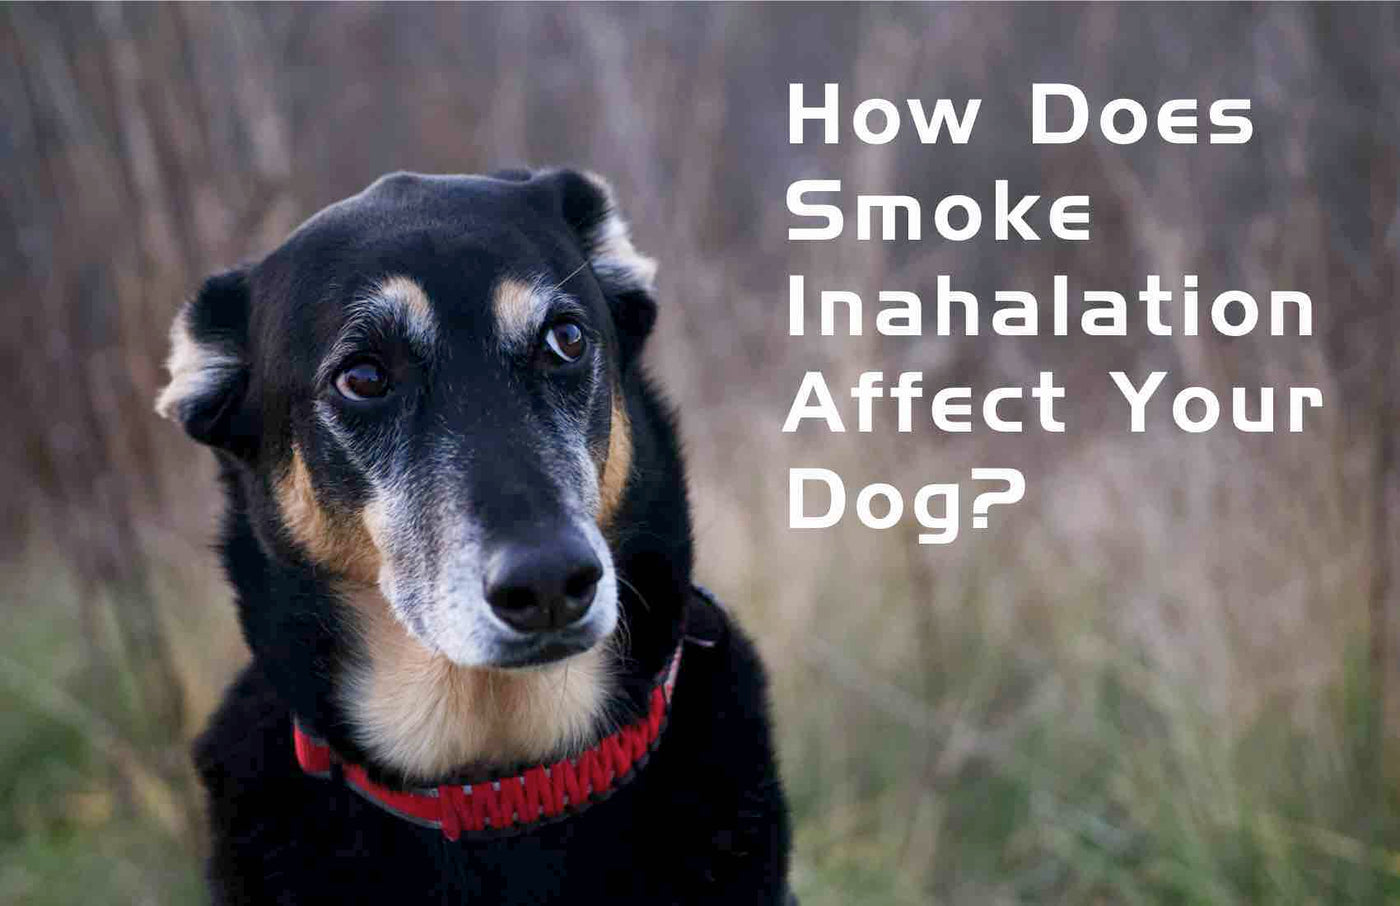 How Does Smoke Inhalation Affect Your Dog?